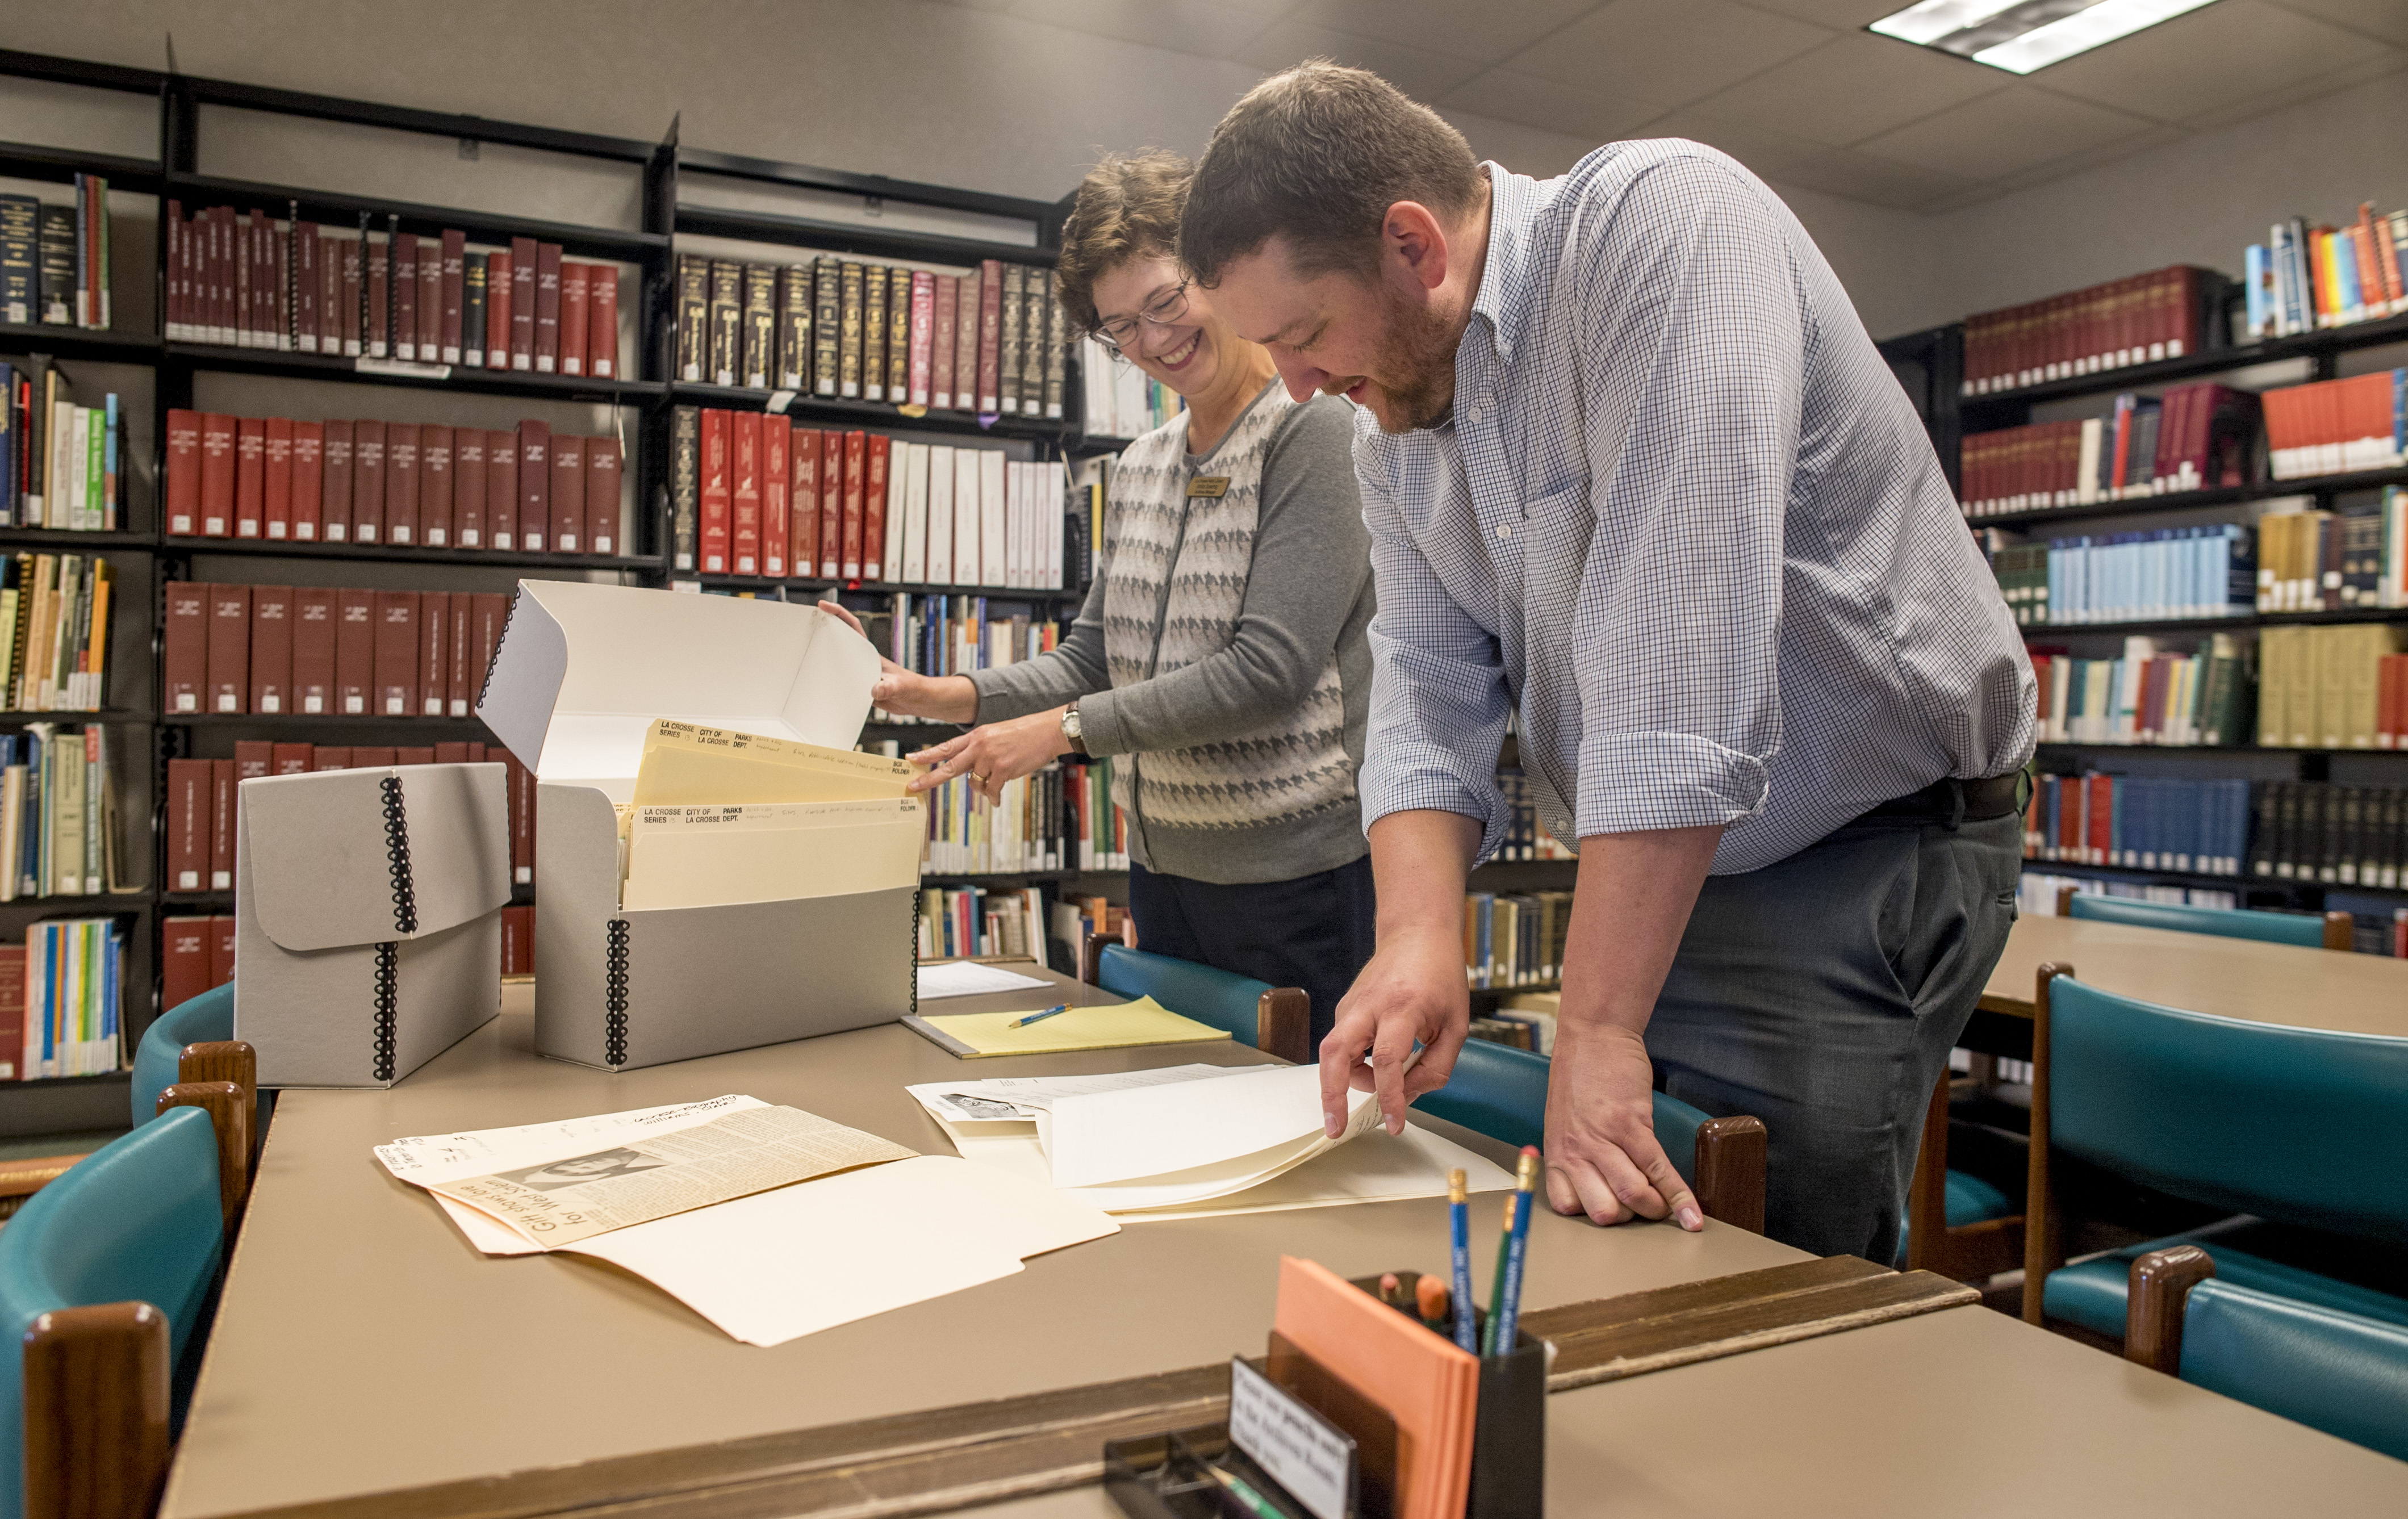 archives staff in reading room looking at historic documents